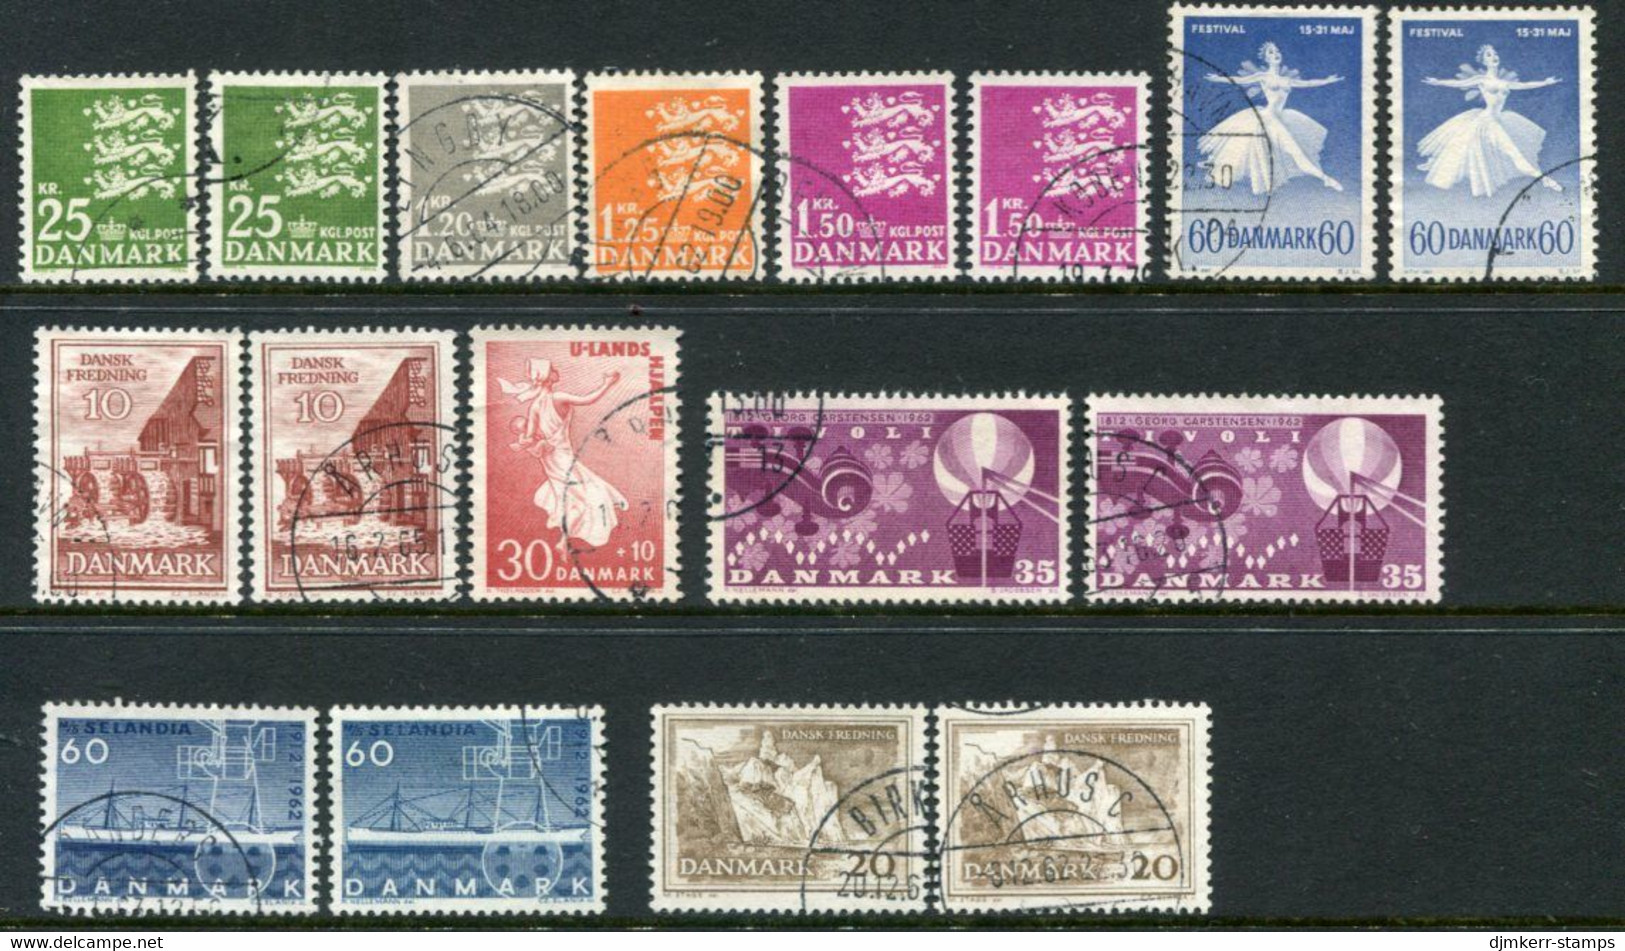 DENMARK 1962 Complete Issues With Ordinary And Fluorescent Papers, Used Michel 399x-408y - Usati